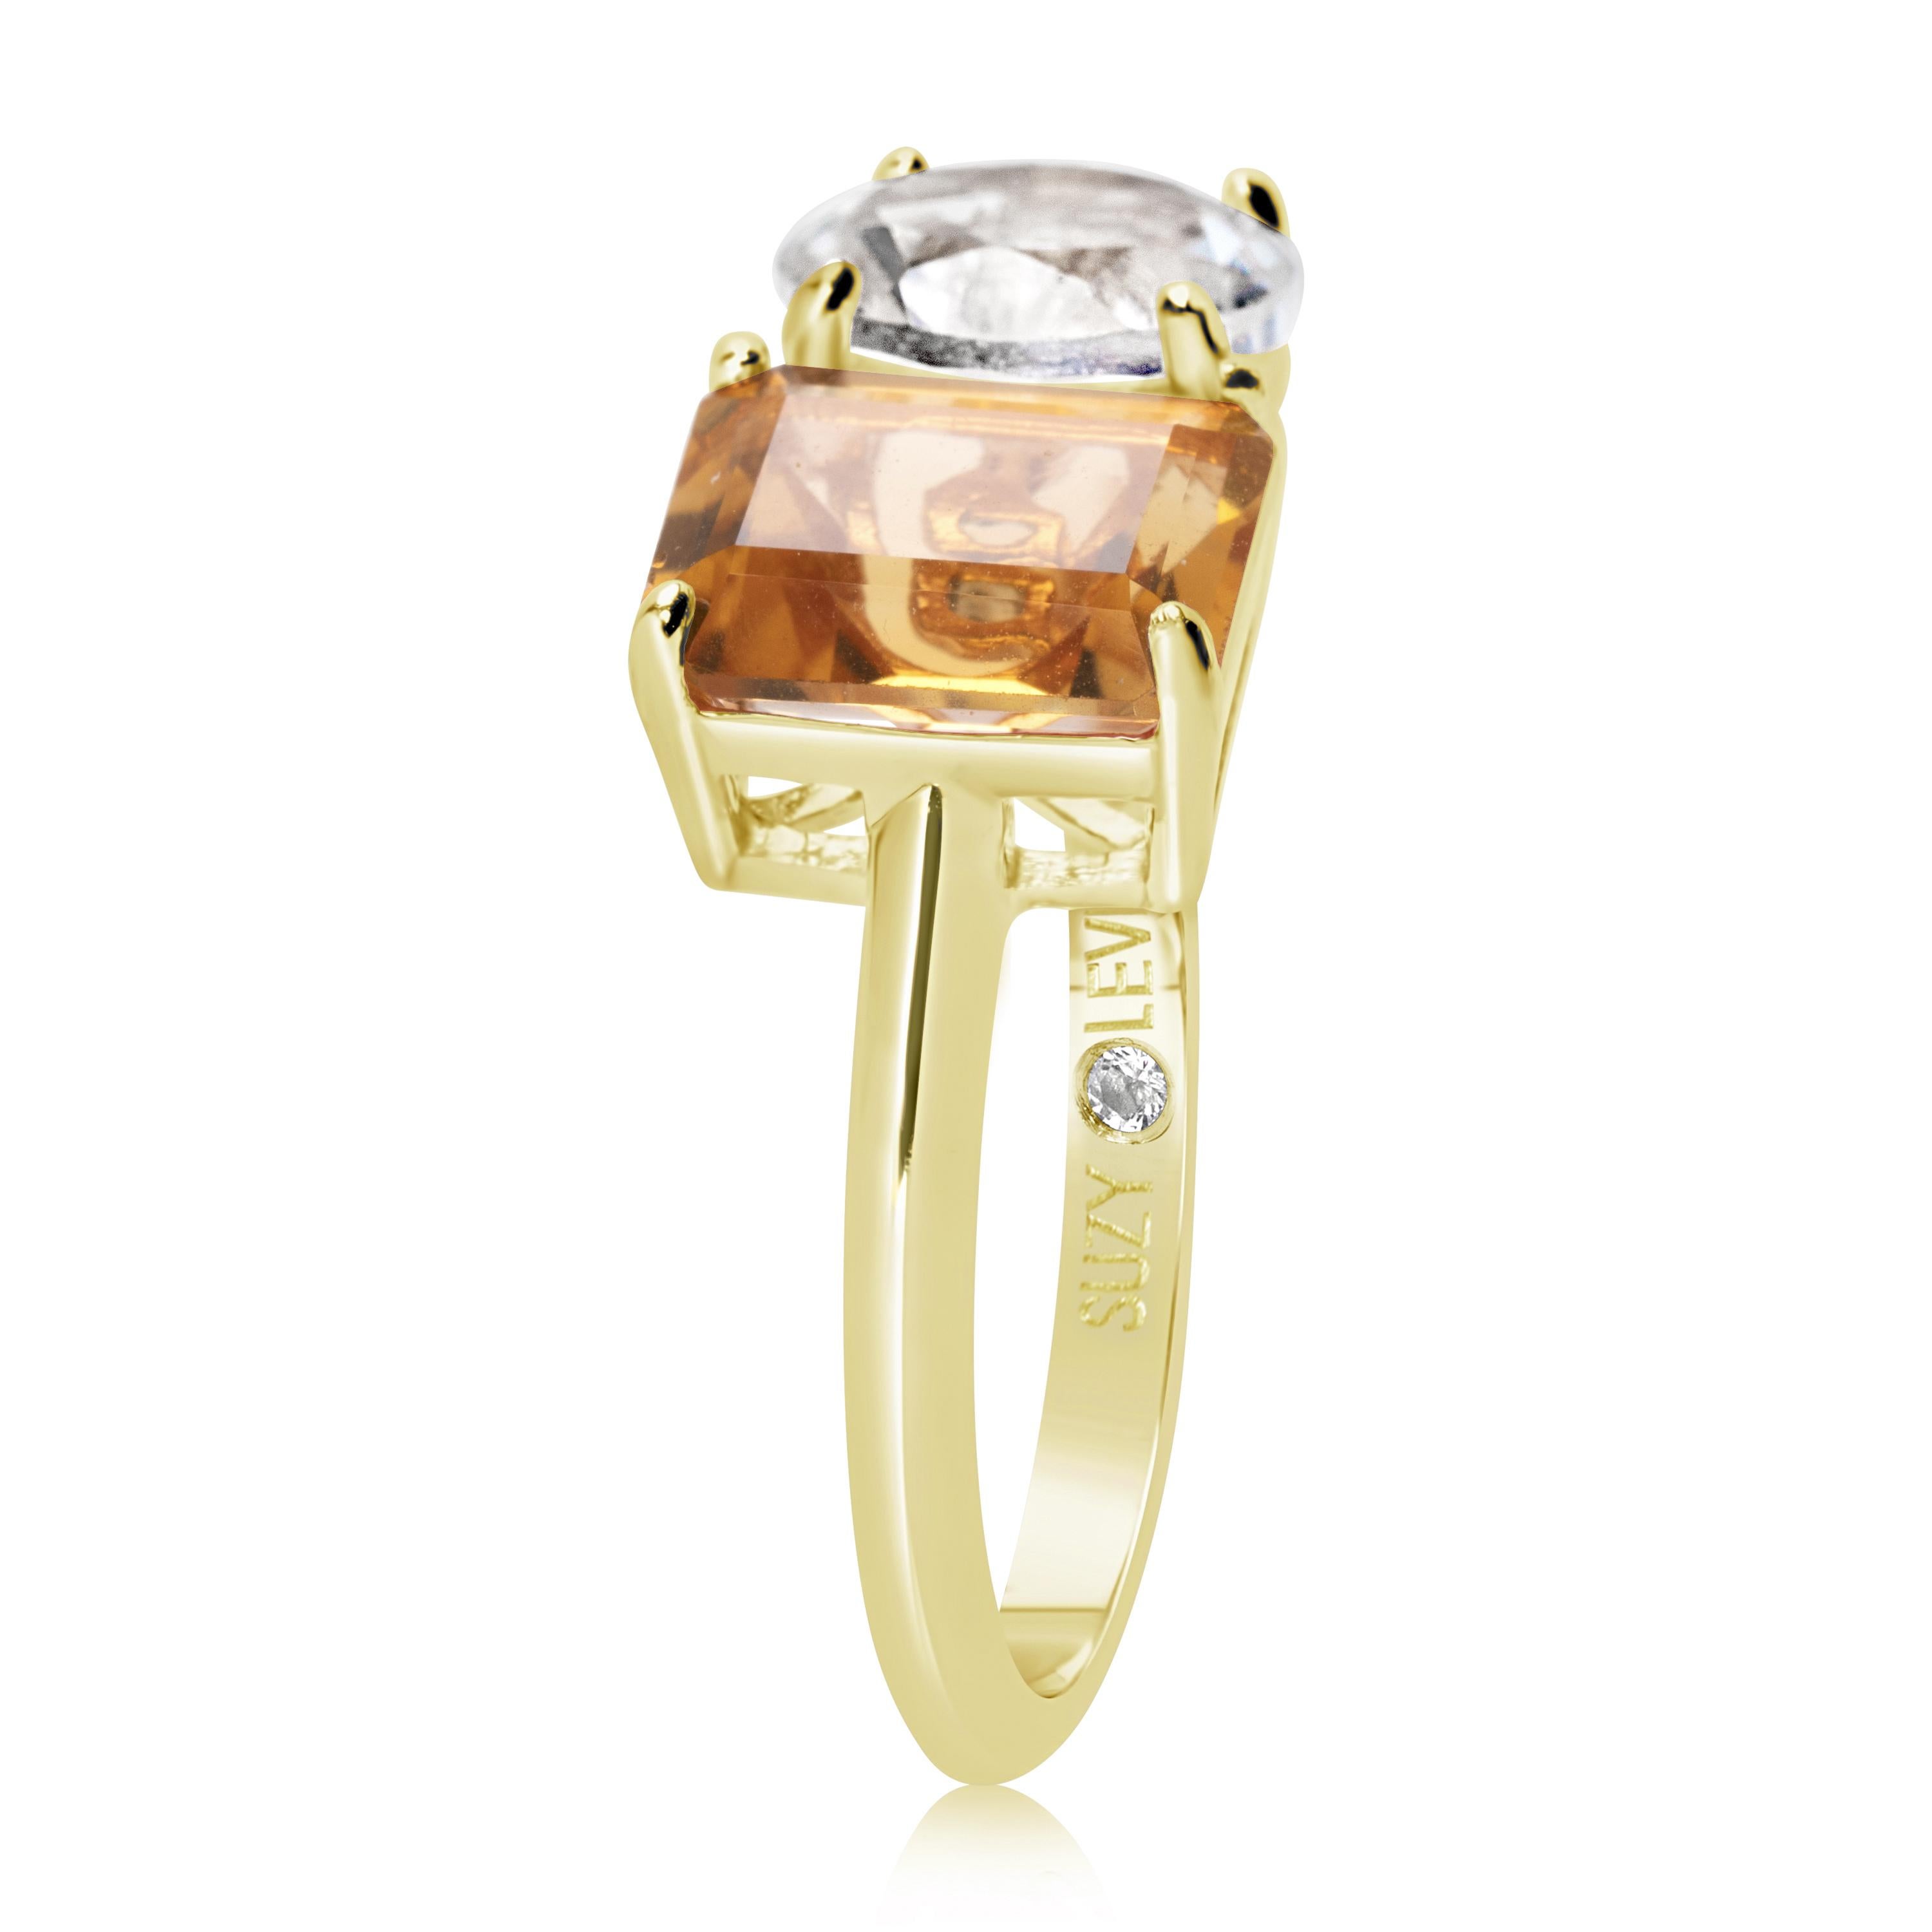 Shimmering in hues of white and orange, this Suzy Levian ring is as on trend as can be, and features a round cut white topaz and an emerald cut orange citrine as a perfectly matched pair. This ring symbolizes a perfect pairing of unique shapes. This